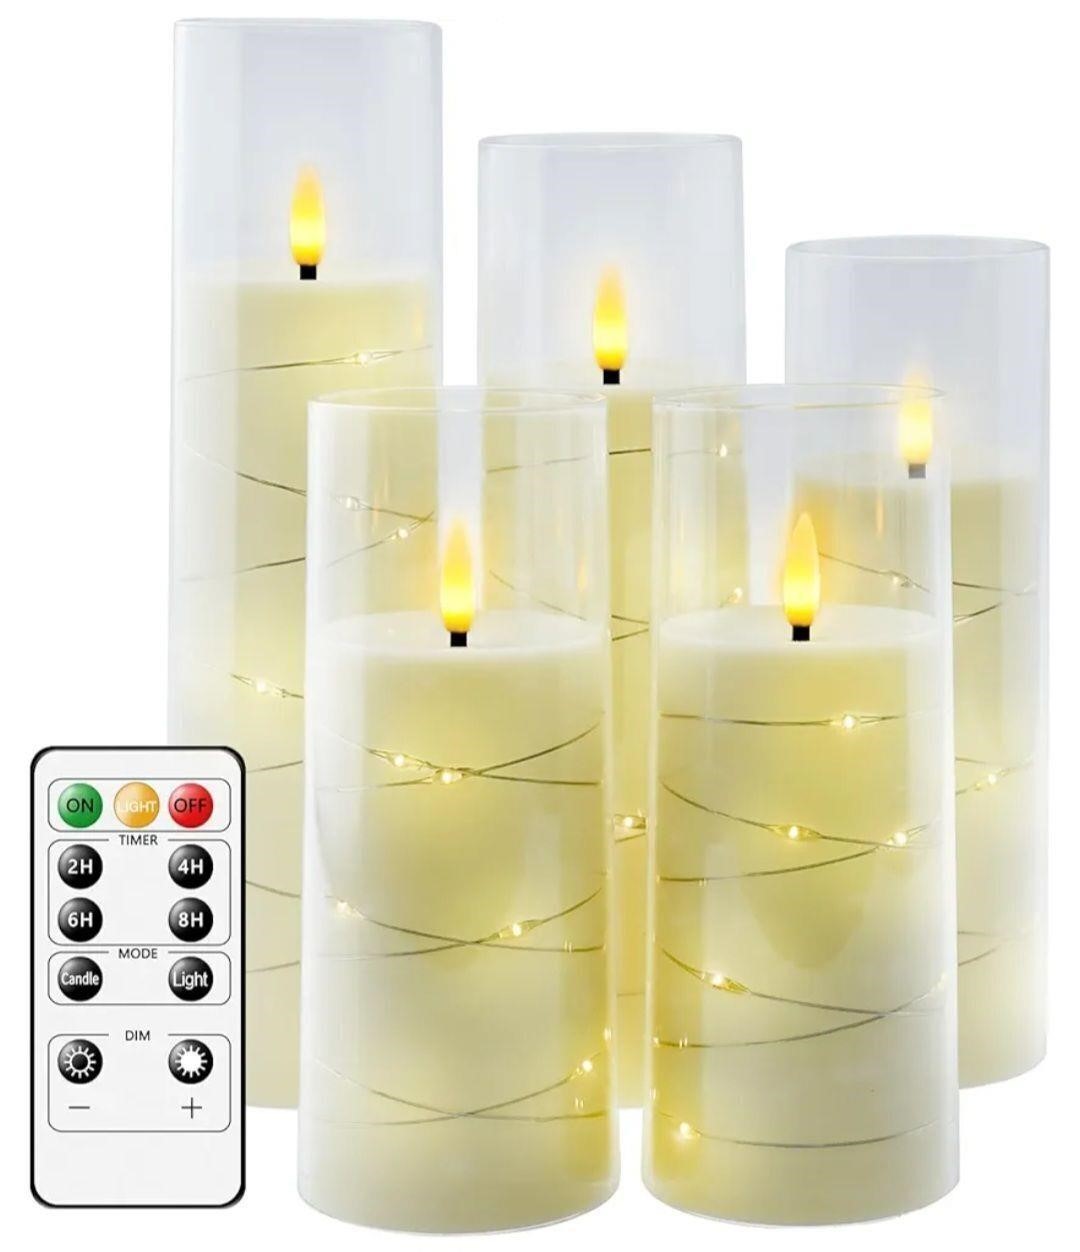 Five piece flameless LED candles with timer